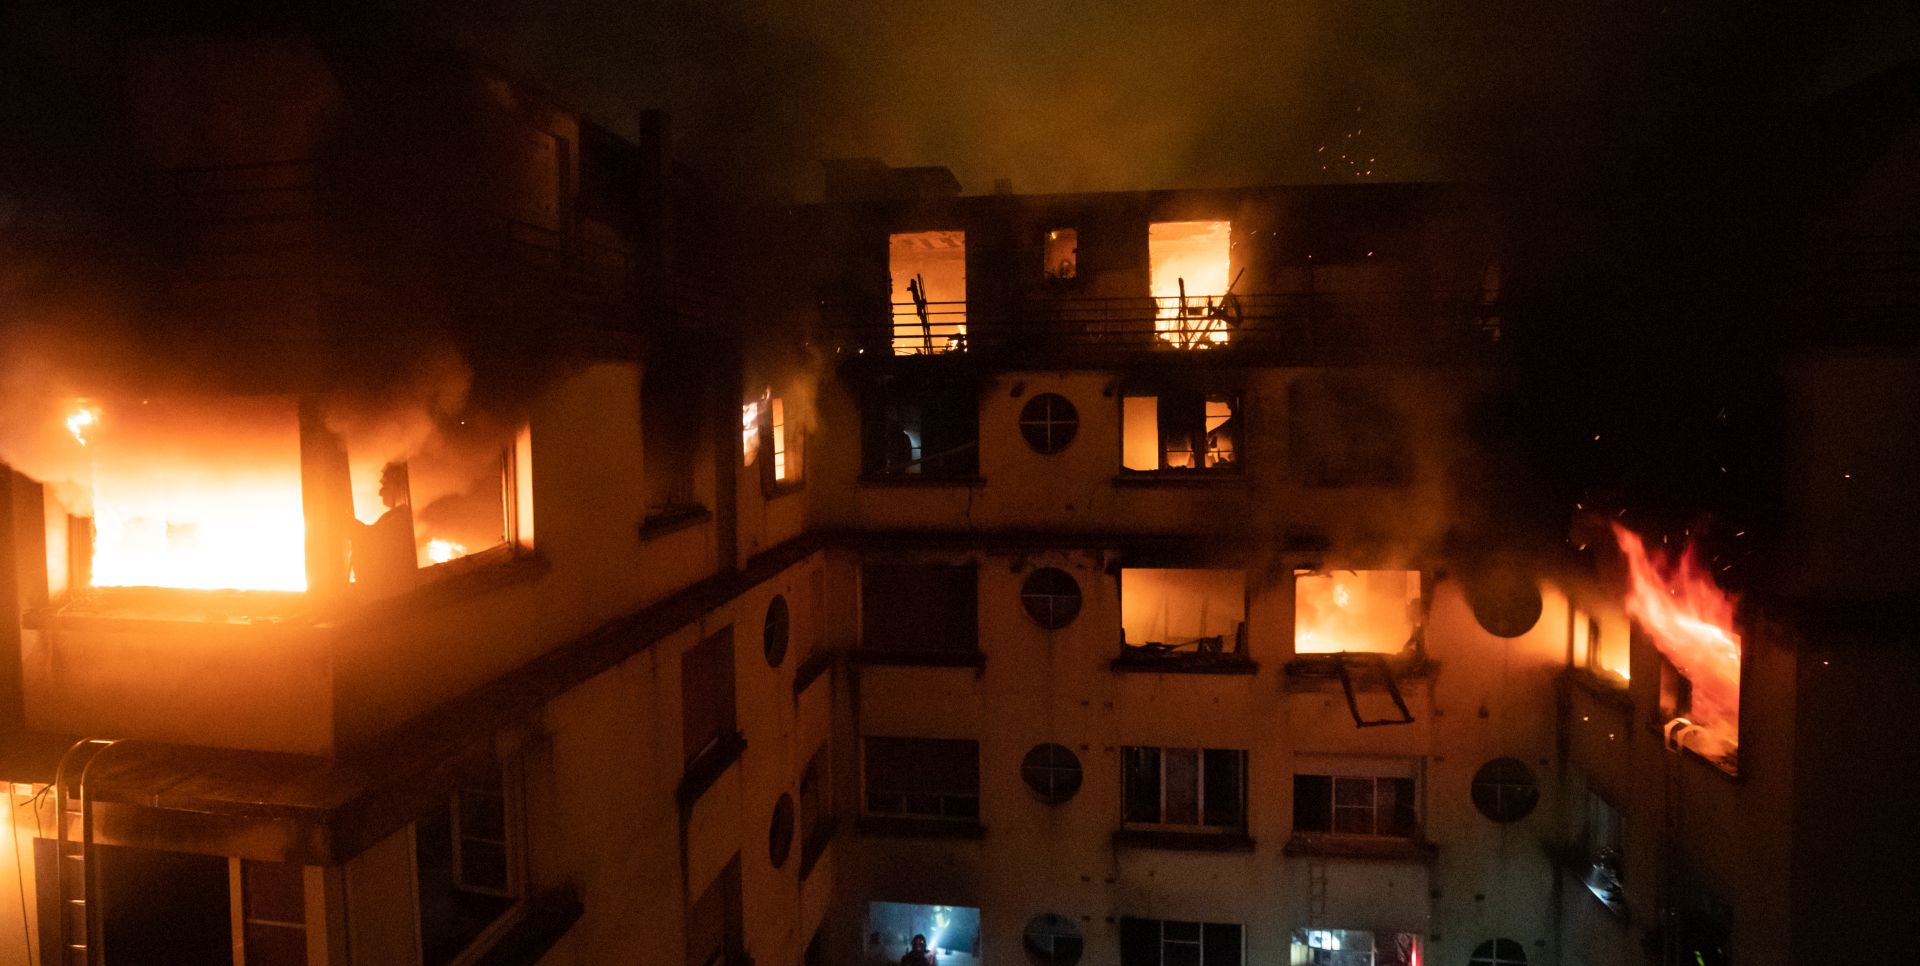 epa07344669 A handout photo made available by the Paris Fire Brigade (BSPP) shows a fire raging at an apartment in the 16th district of western Paris, France, early 05 February 2019. Eight people have been killed and 30 others have been injured in the fire after it broke out in the early hours of 05 February. The initial investigation suggests there blaze was of 'criminal' intention, according to the Paris prosecutor.  EPA/BENOIT MOSER / BSPP HANDOUT EDITORIAL USE ONLY / NO SALES HANDOUT EDITORIAL USE ONLY/NO SALES